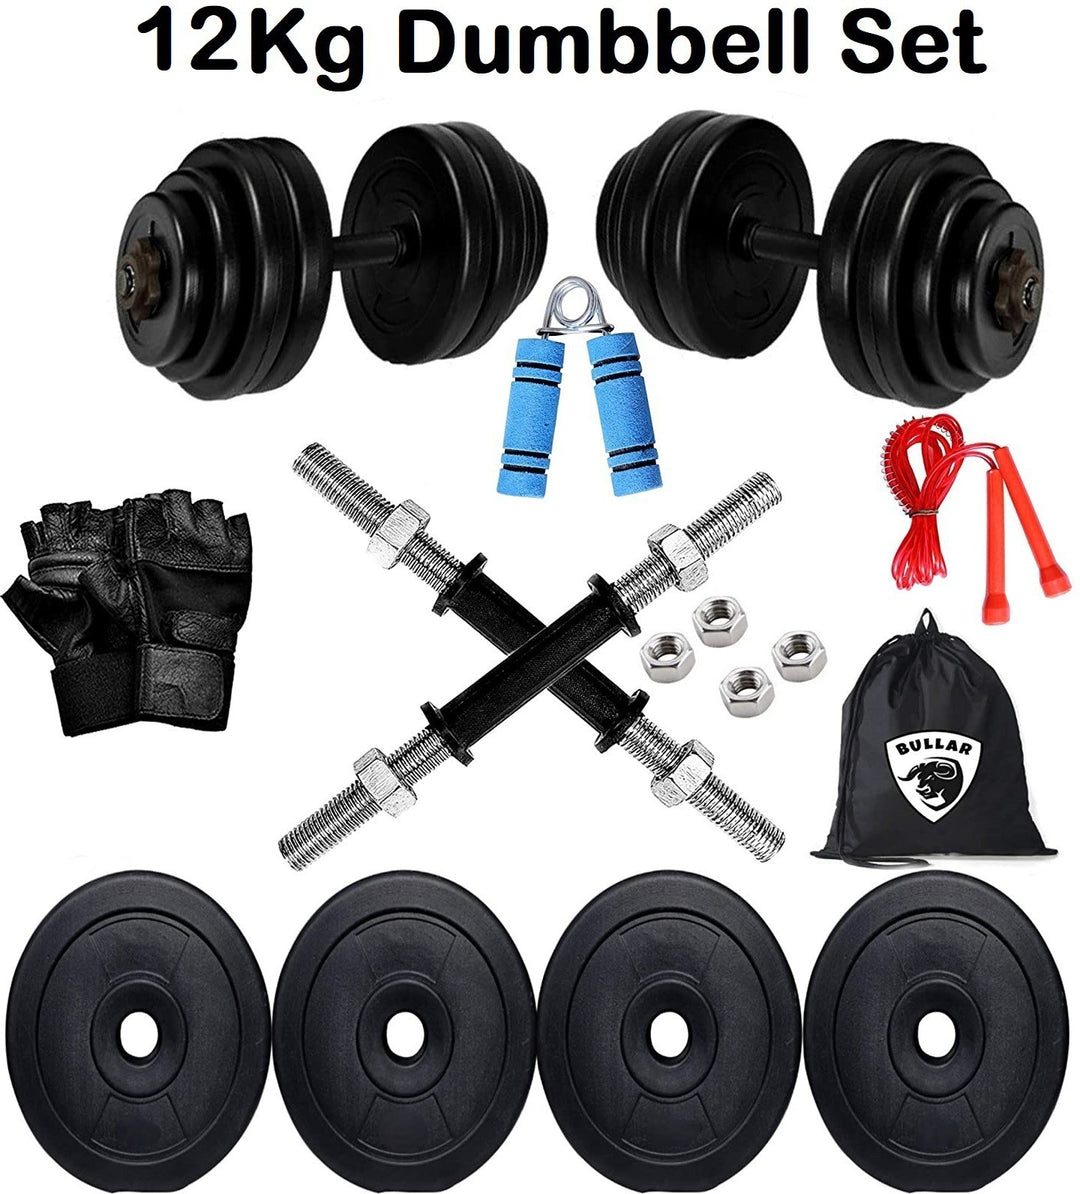 12 Kg Dumbbell Set | Weight Plates | Weight Plates for Home Gym | Gym Weights | Dumbbells Set For Home Workout